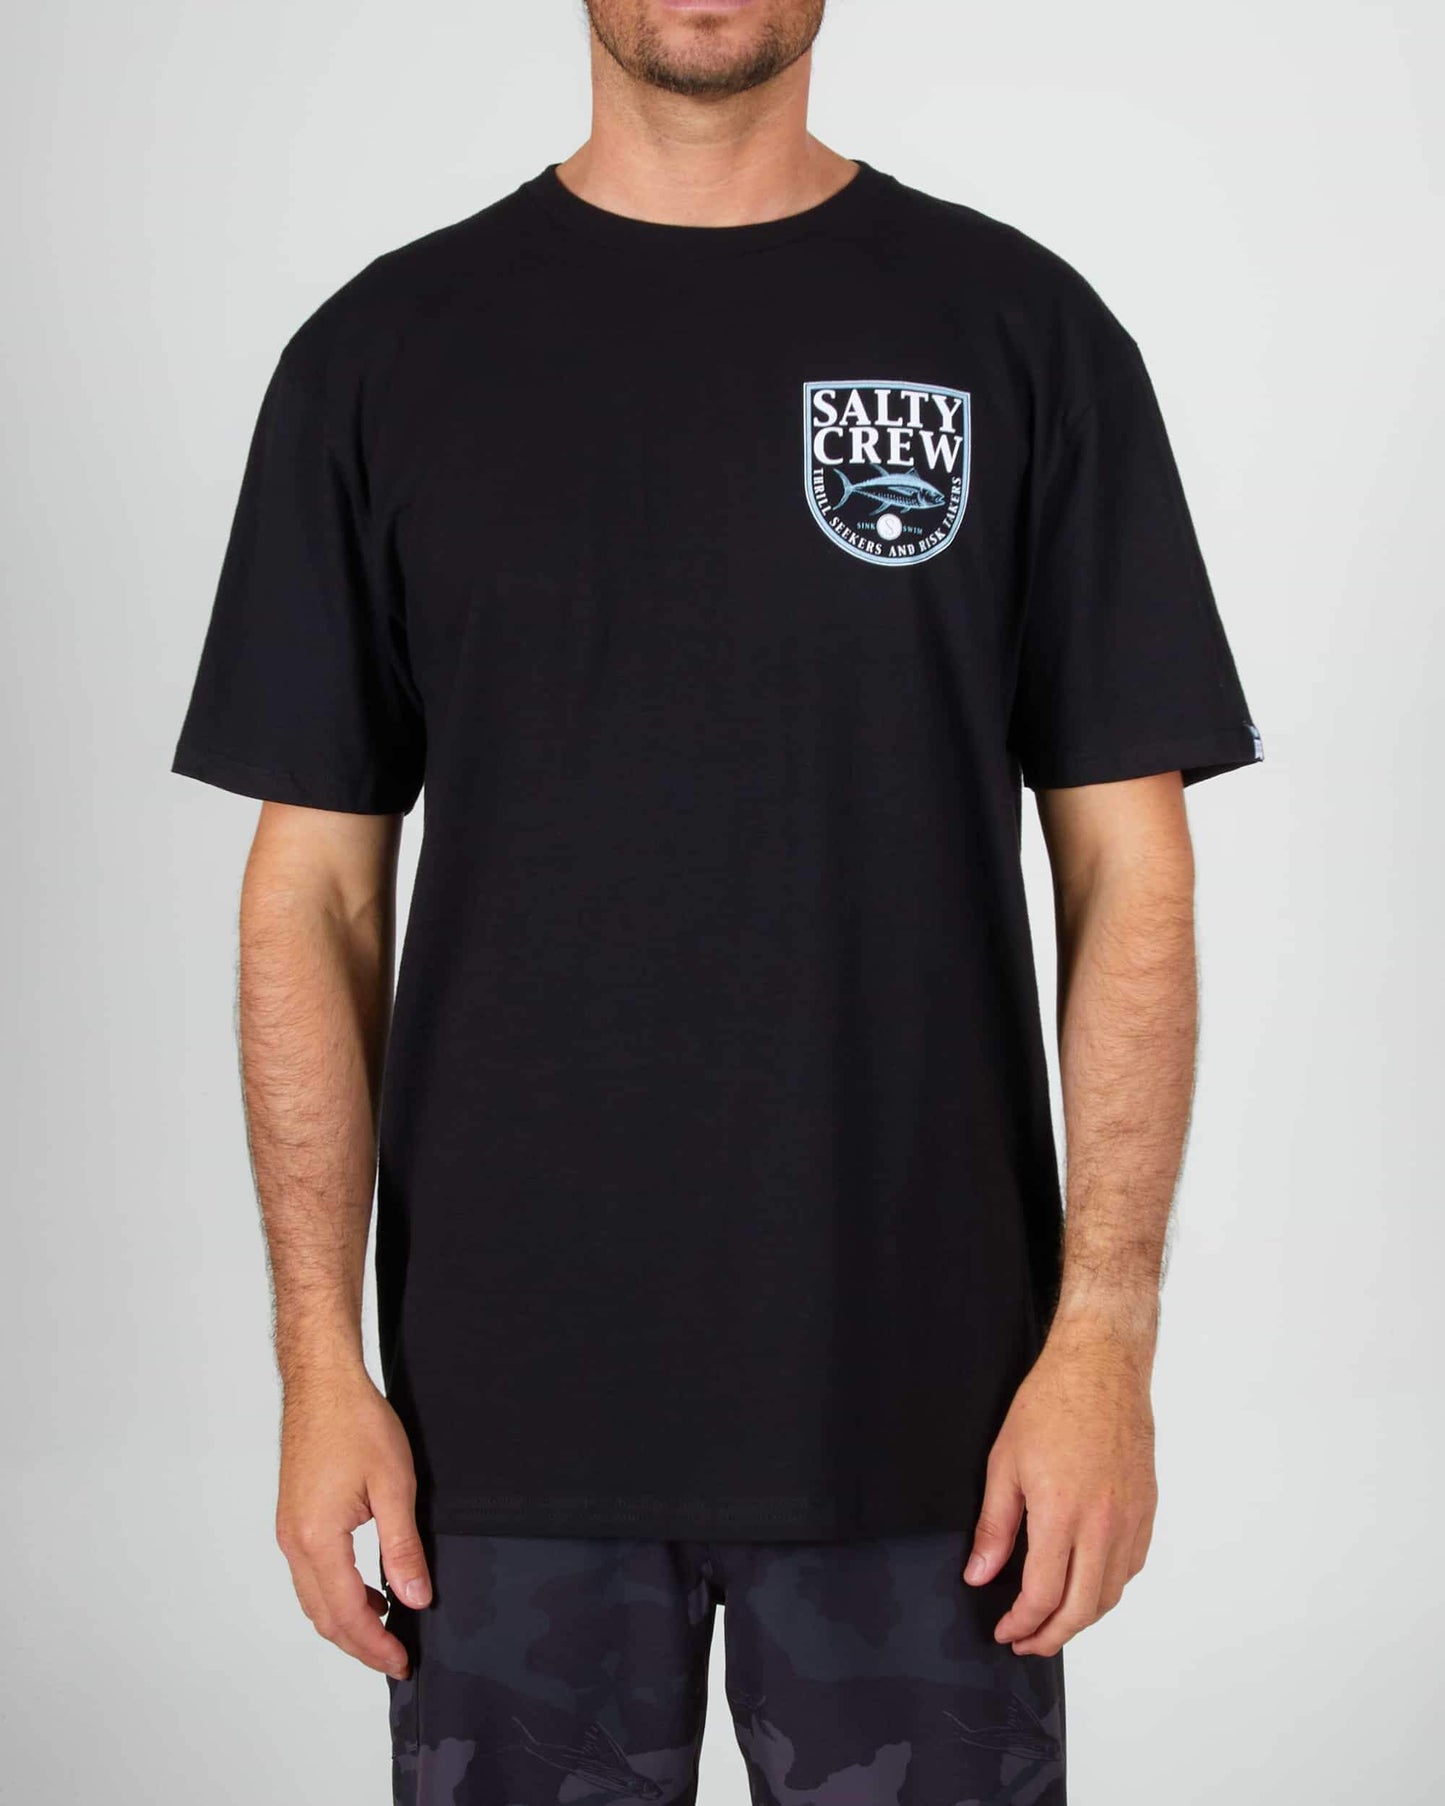 Salty crew T-SHIRTS S/S CURRENT STANDARD S/S TEE - Black in Black